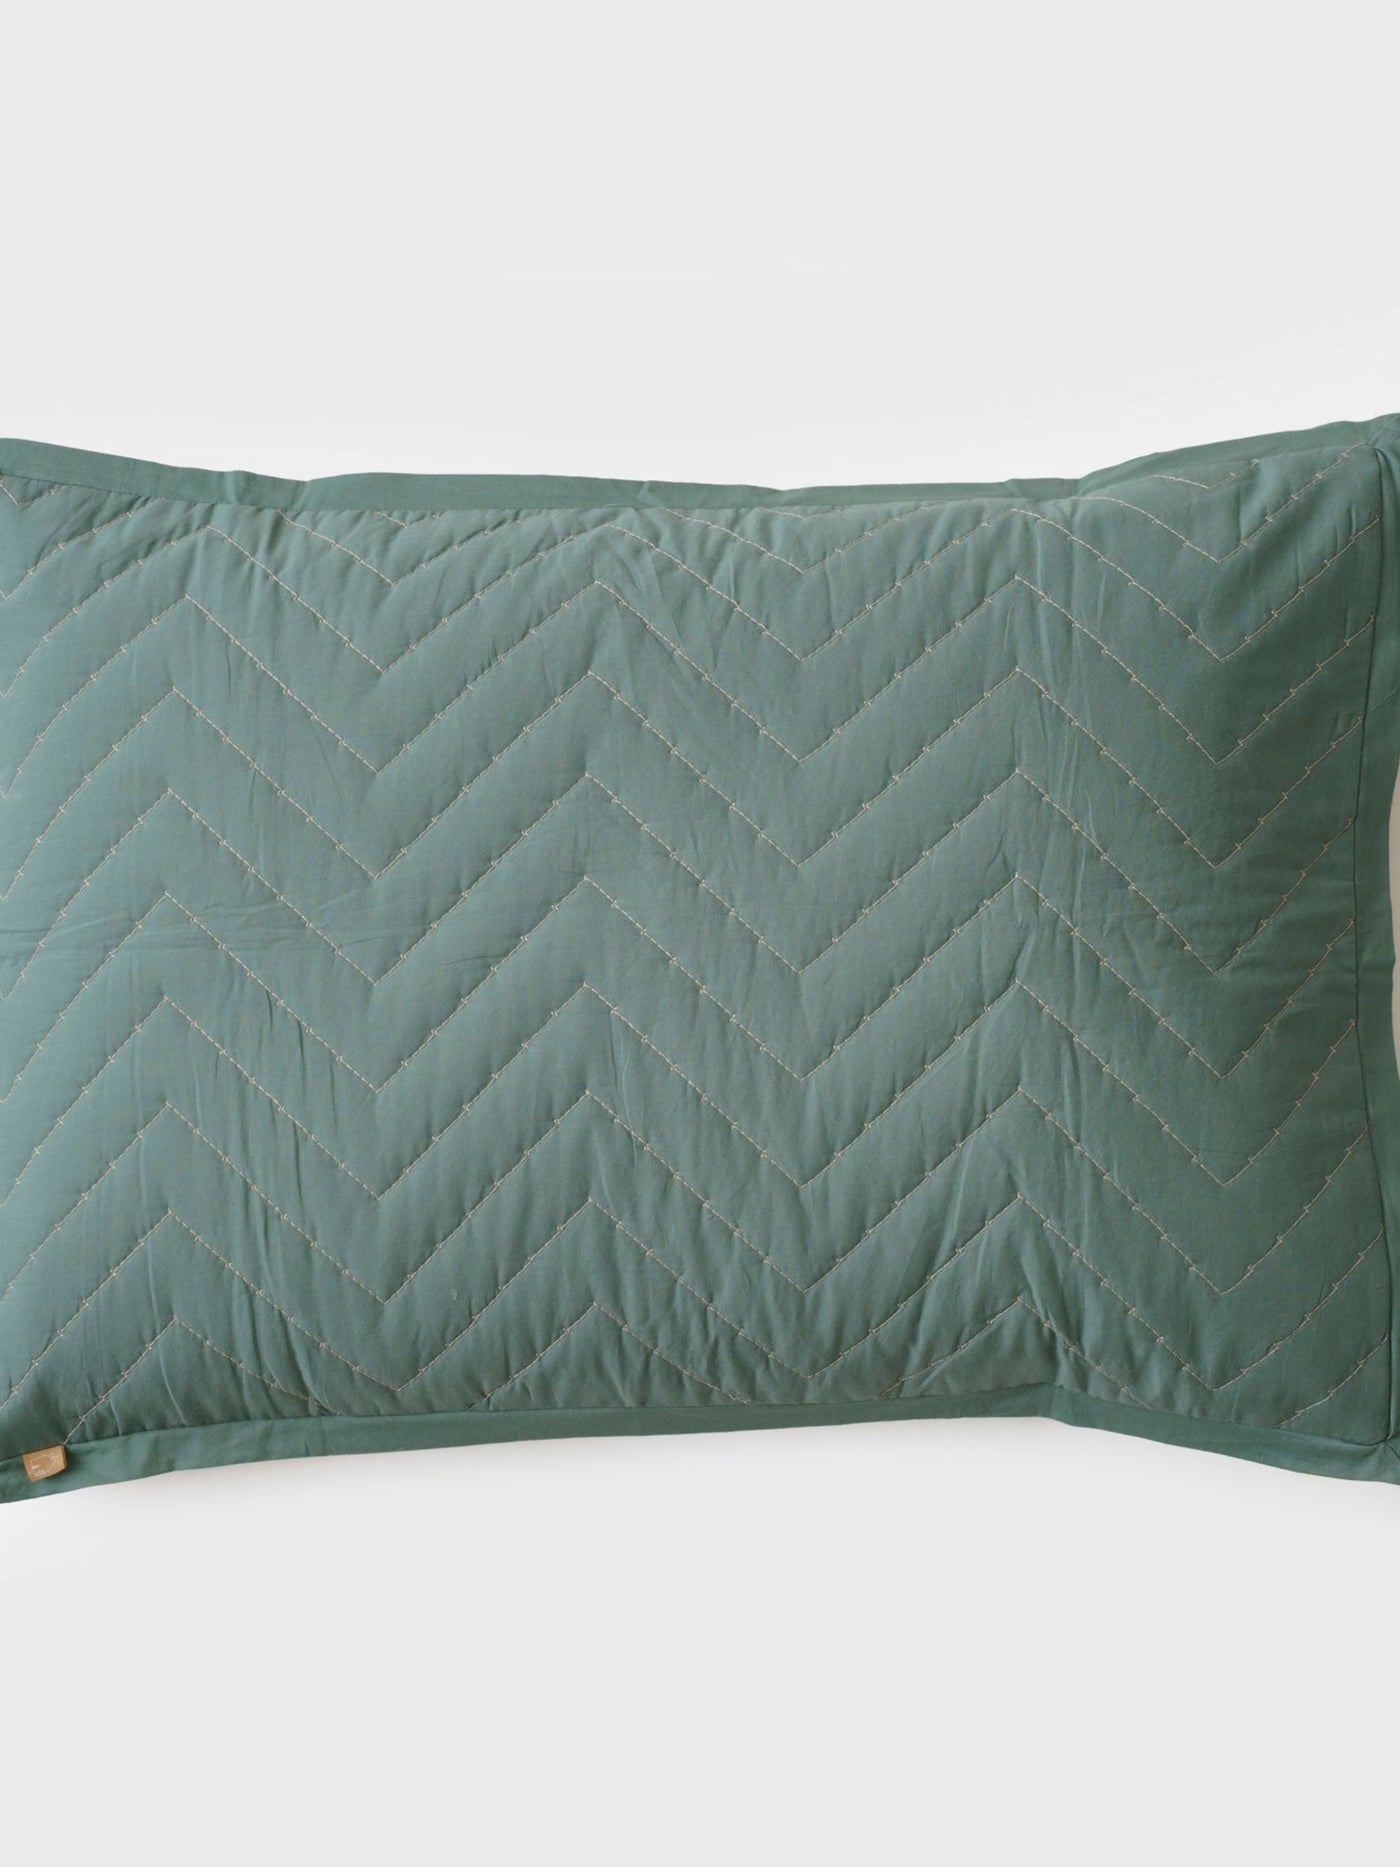 Chevron Green Quilted Bedding Set